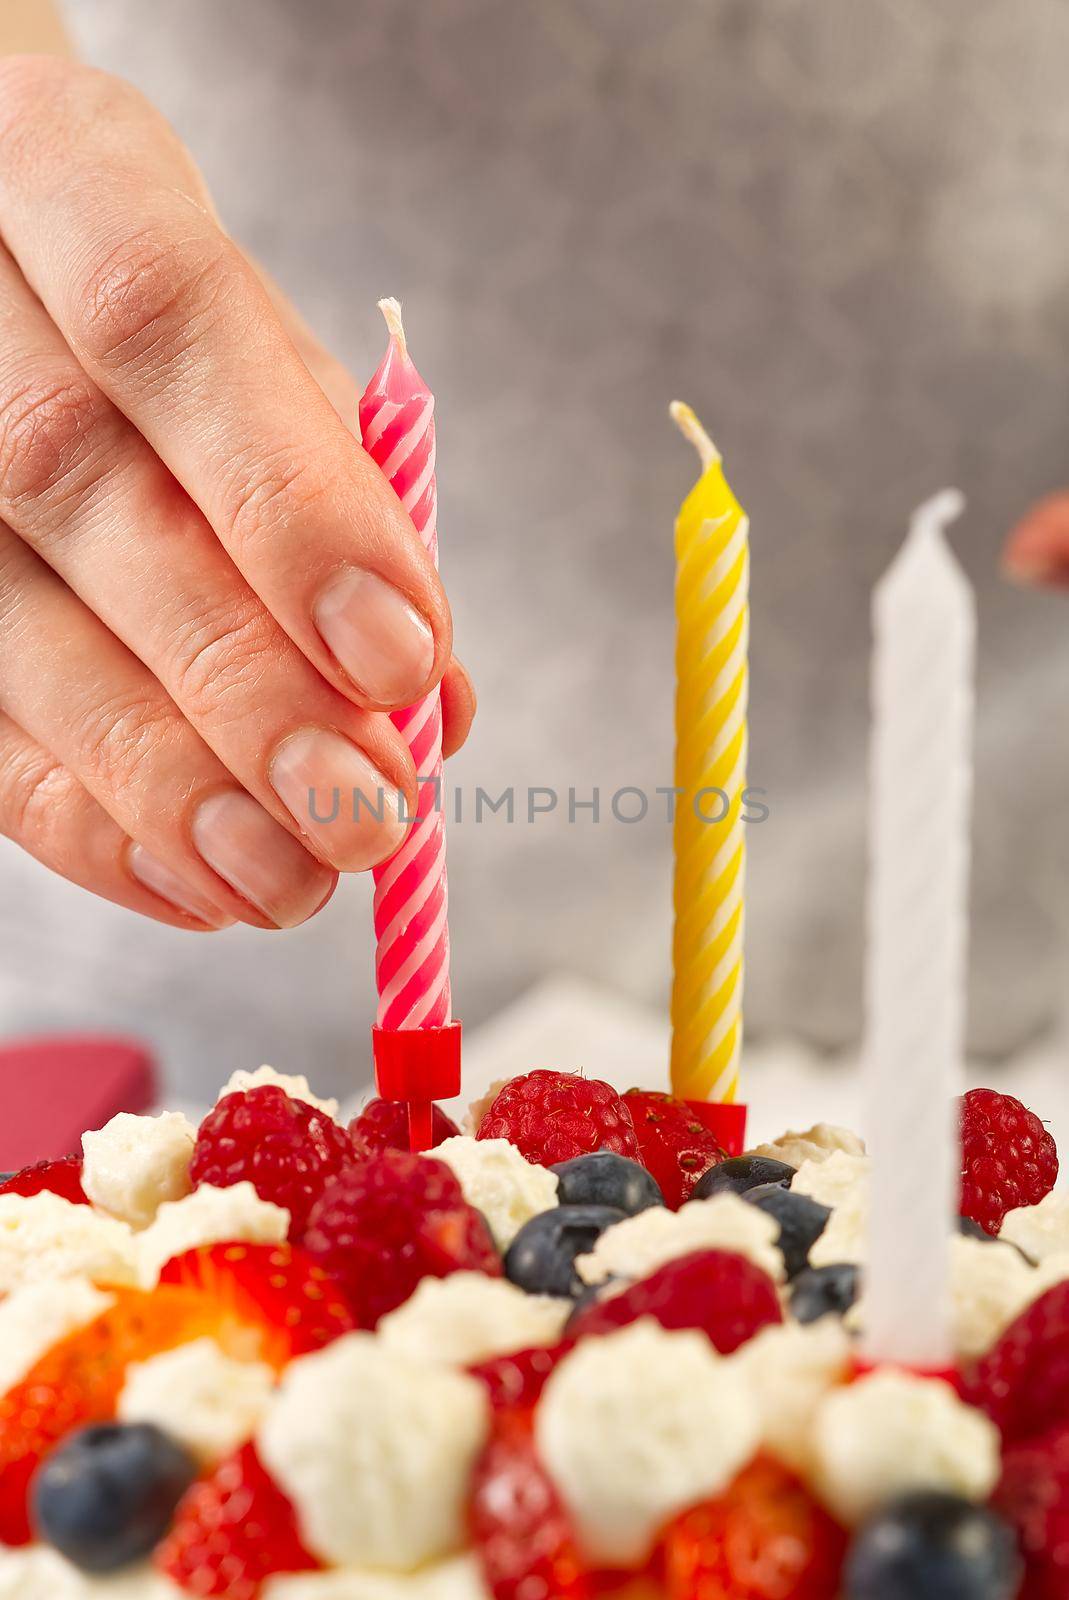 female hand sets birthday candles on homemade strawberry cake. strawberry pie and birthday candles